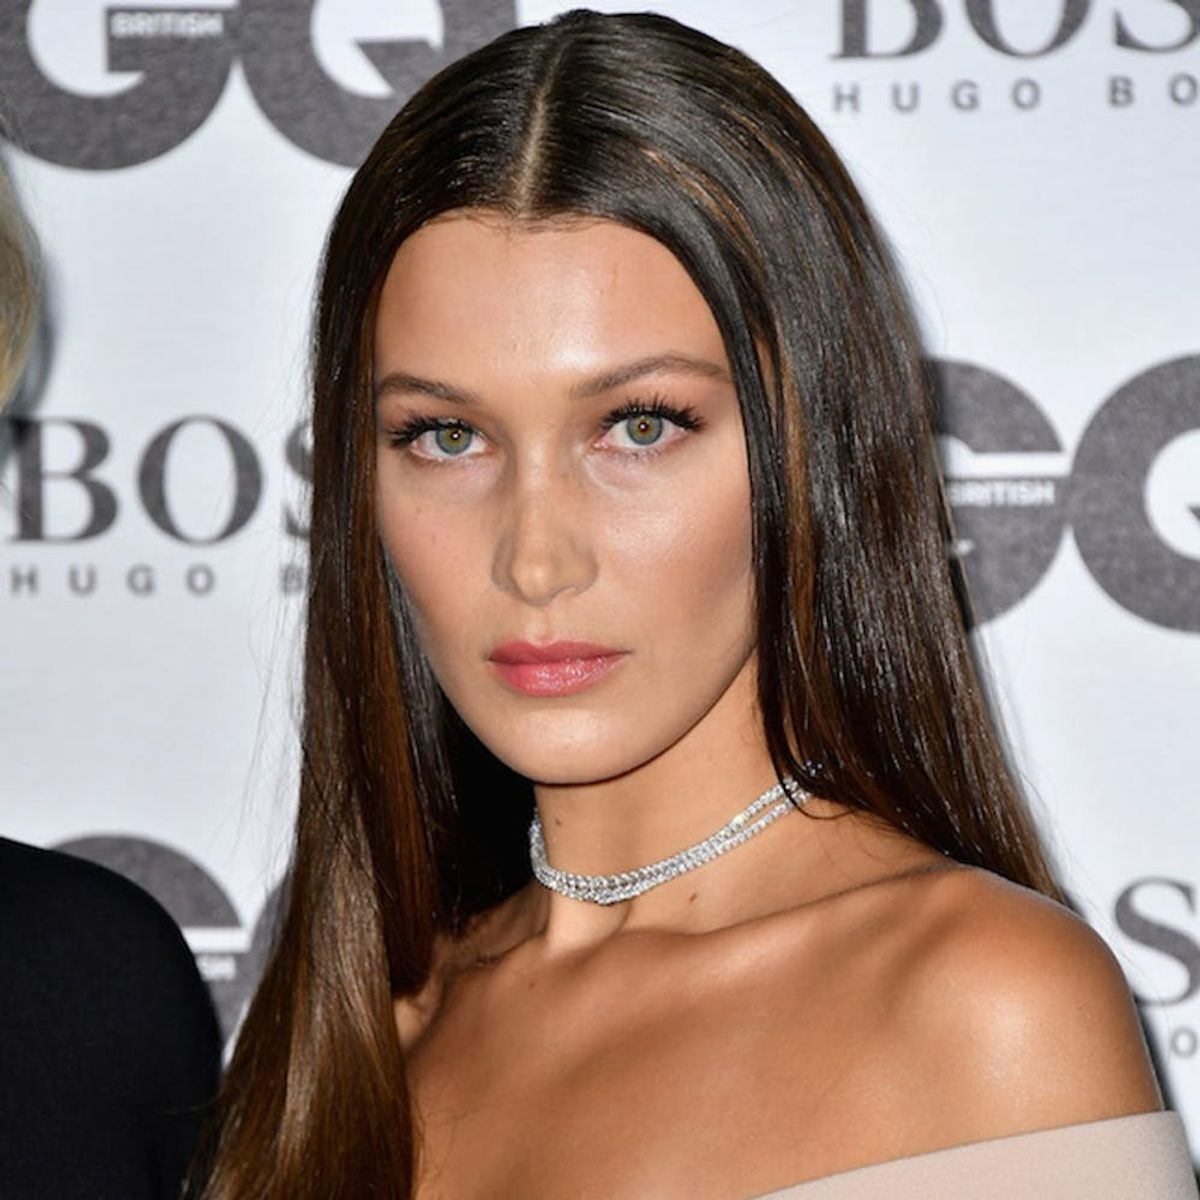 Here’s Why Bella Hadid’s Latest Modeling Gig Is Stirring Up Major Drama